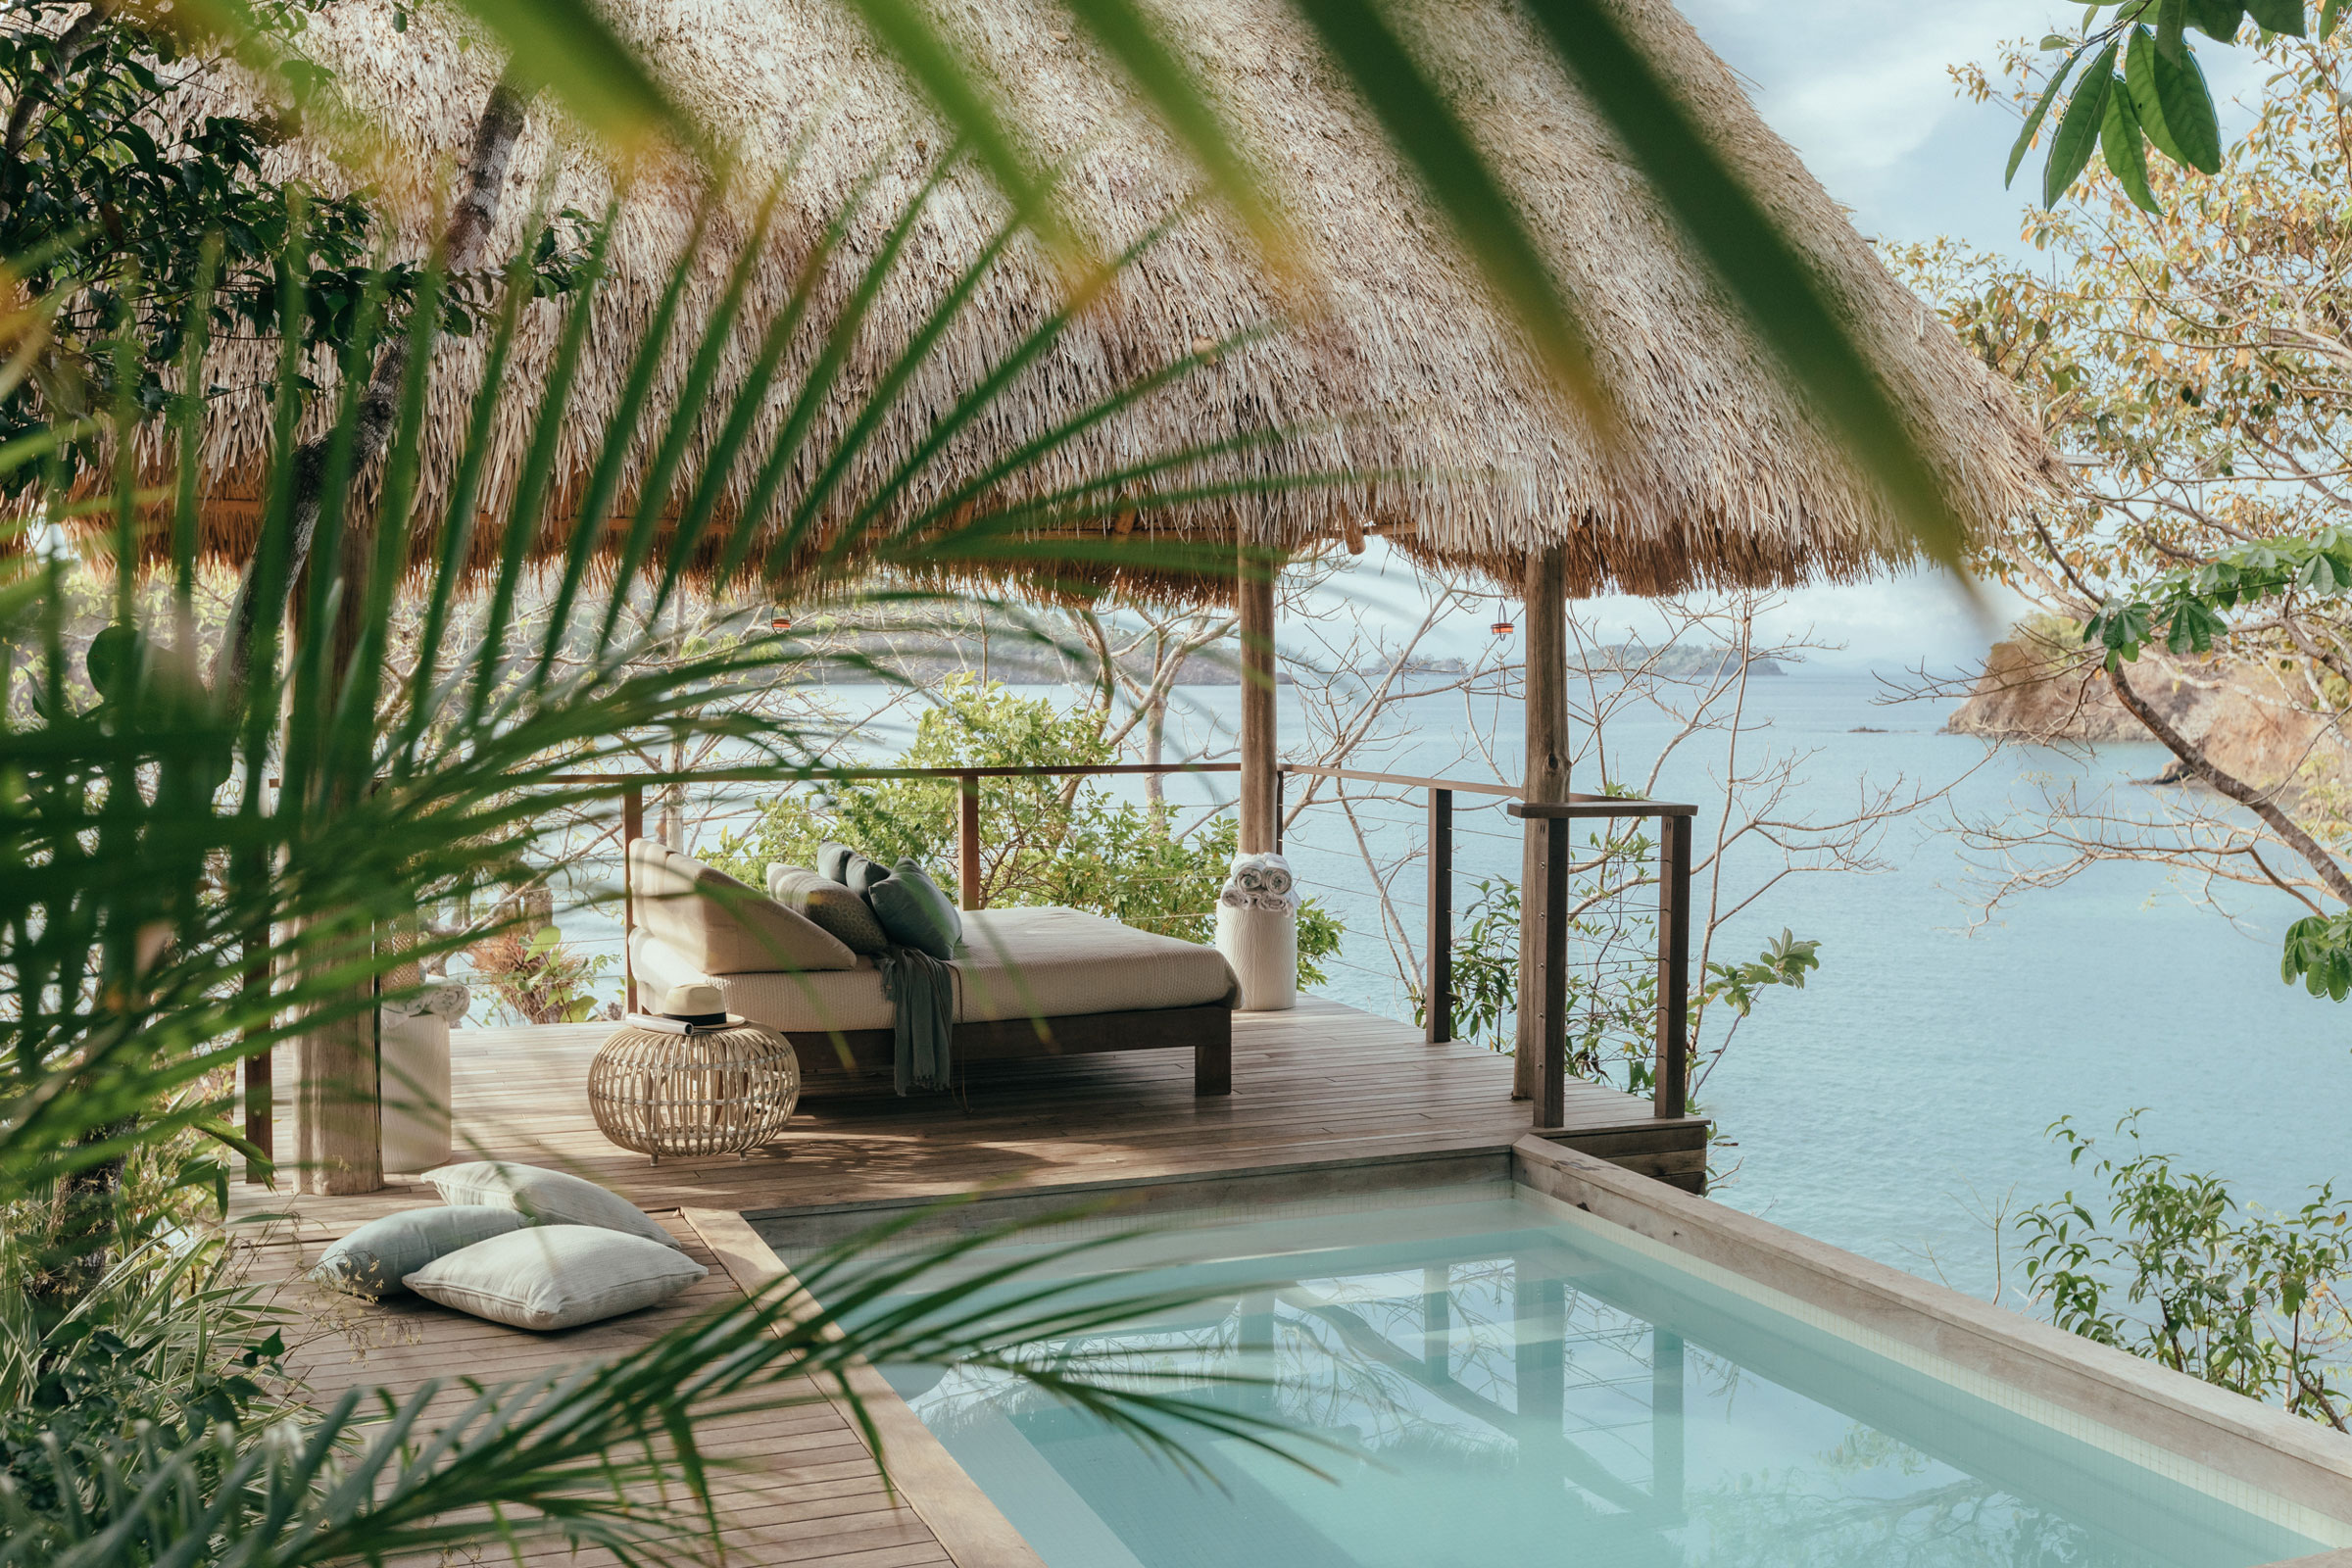 Islas Secas is the Private Getaway of Your Dreams